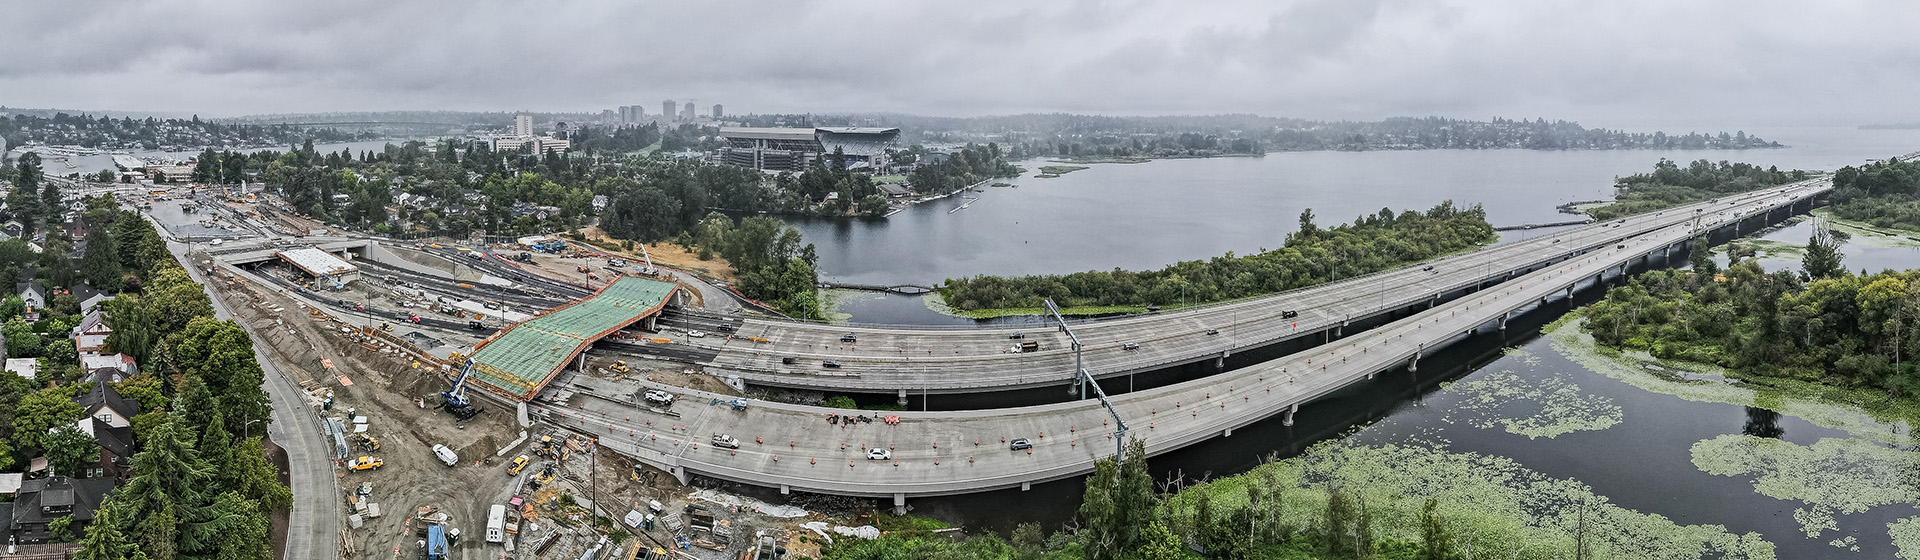 View of the montlake transportation project showing construction of the sr520 eastbound bridge.